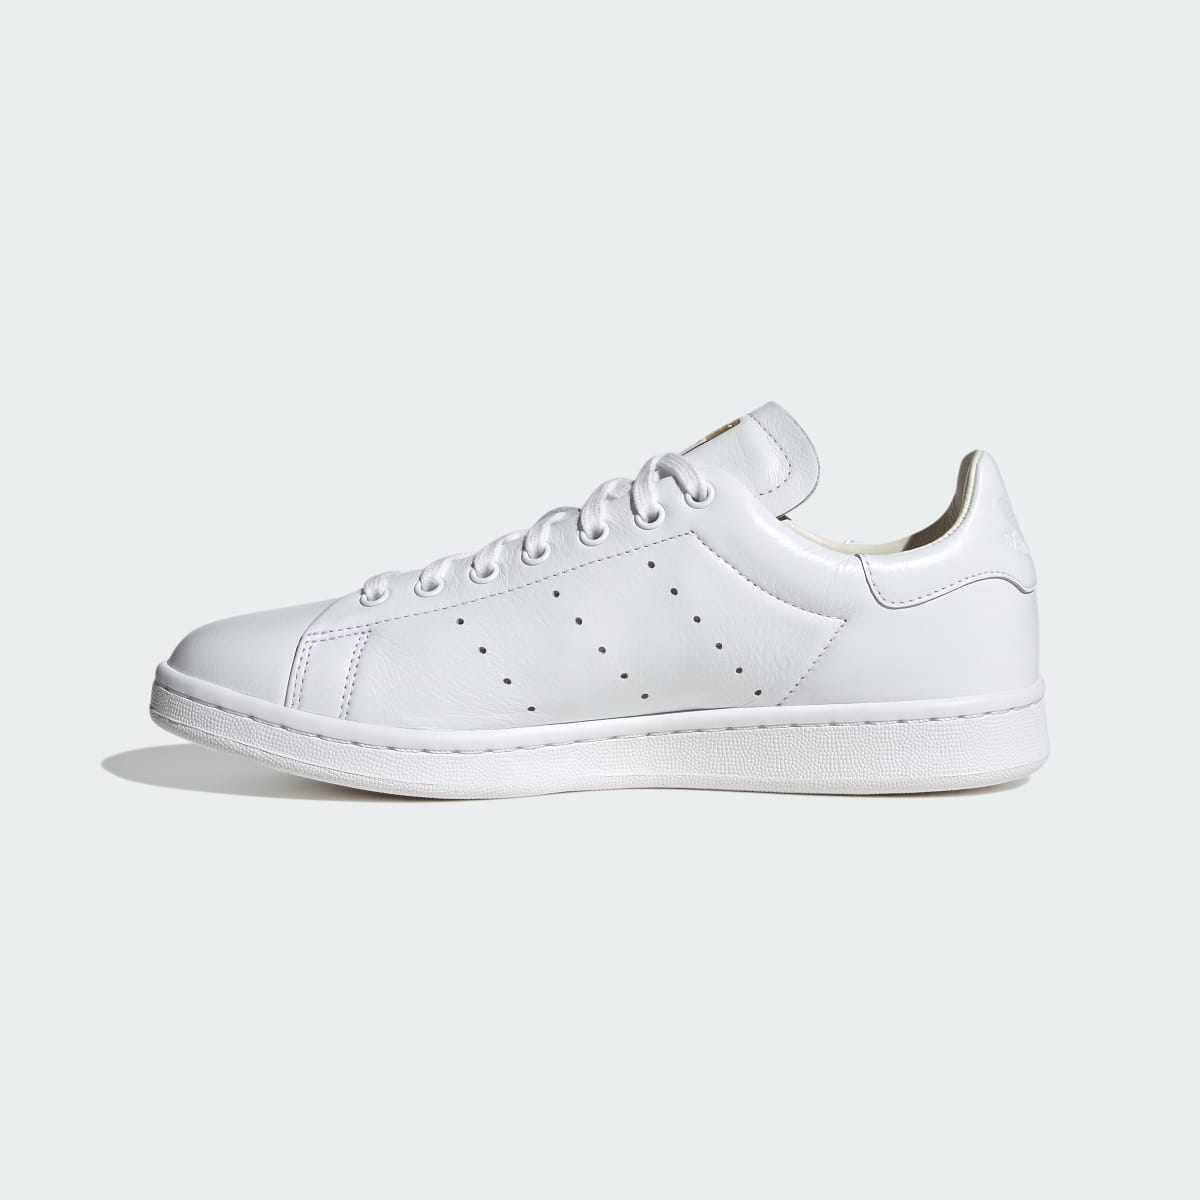 Adidas Chaussure Stan Smith Luxe. 8